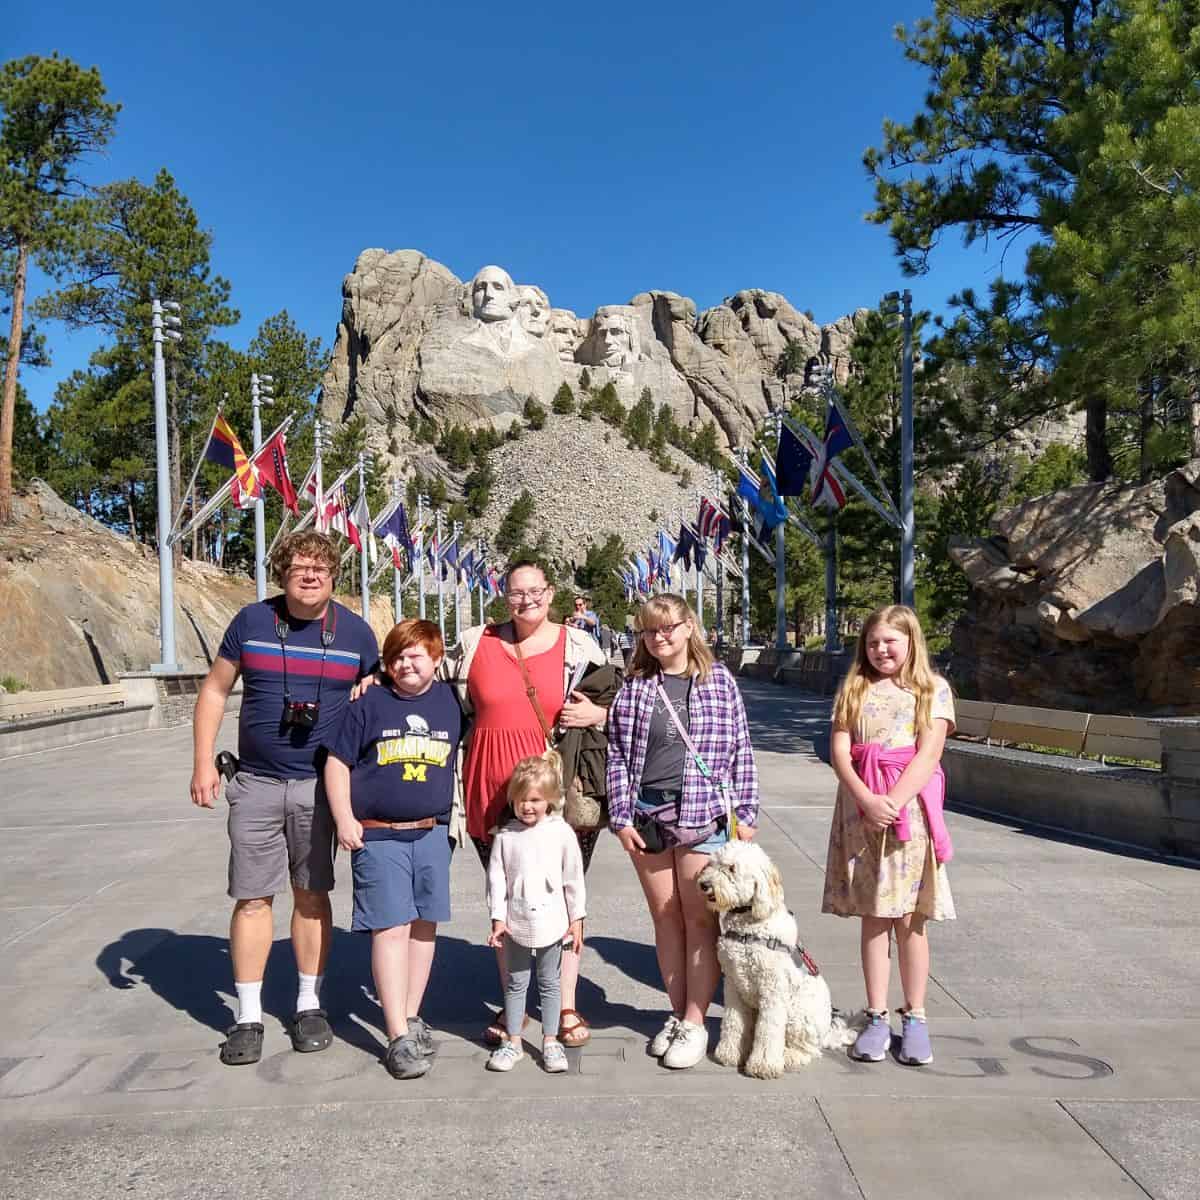 A family of 6 and a dog standing in front of Mt Rushmore.